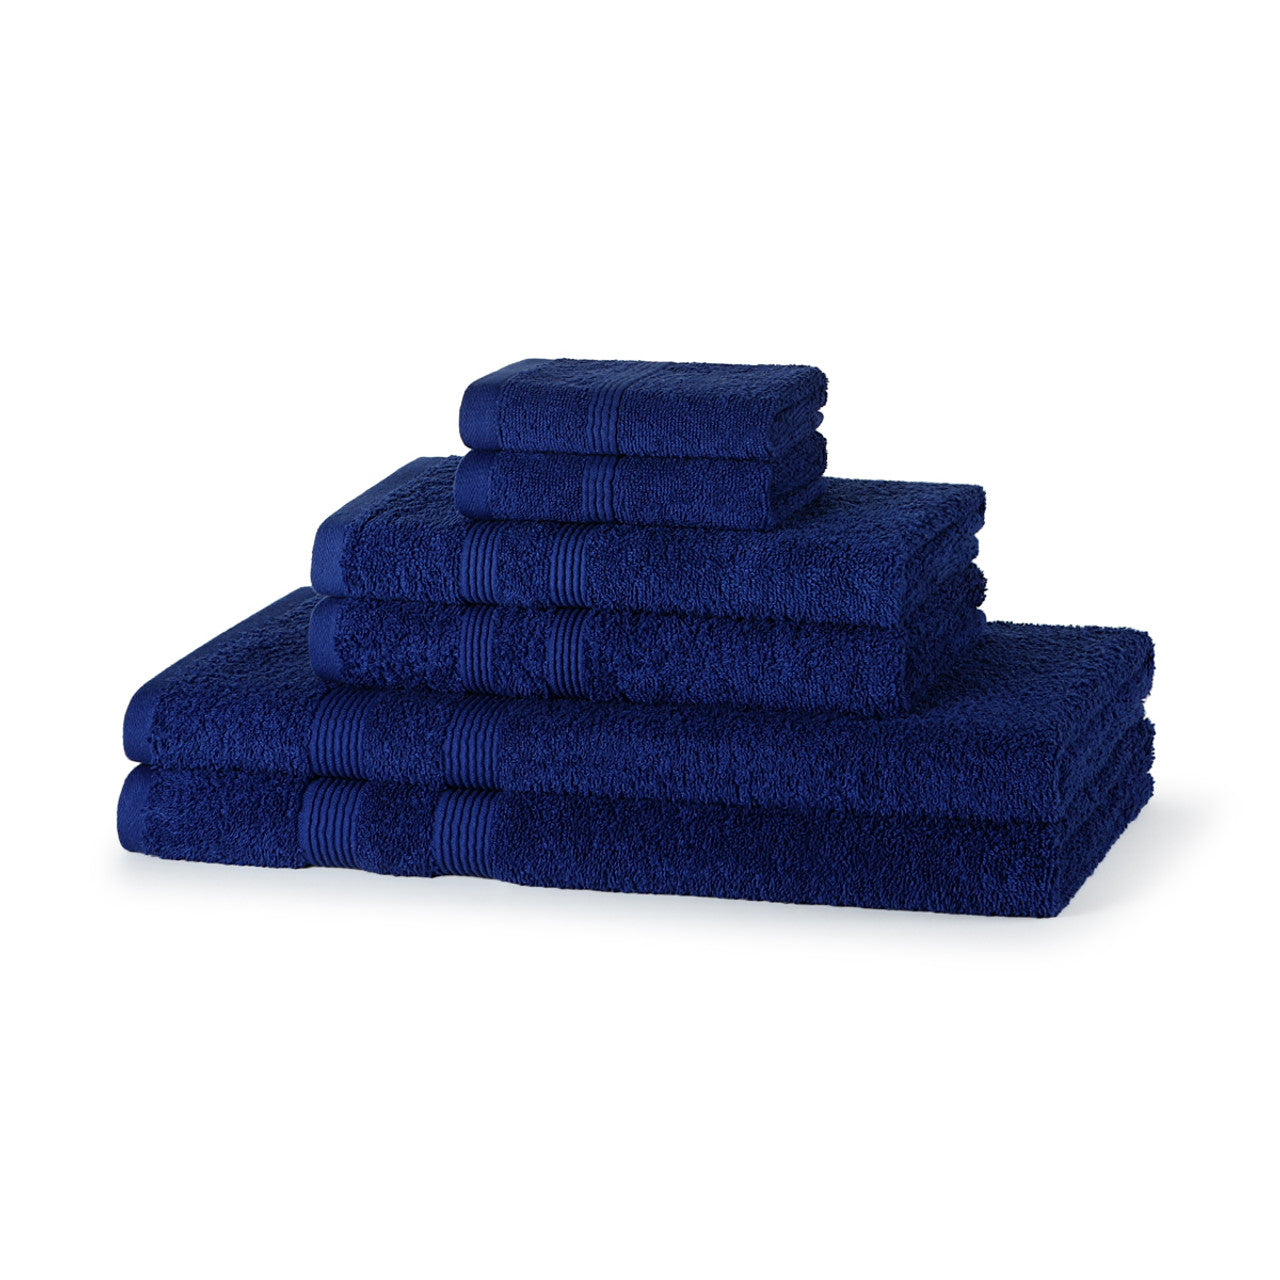 600 GSM Quality 6-Piece Towel Bale - Includes 2 Each of Face, Hand & Bath Towels